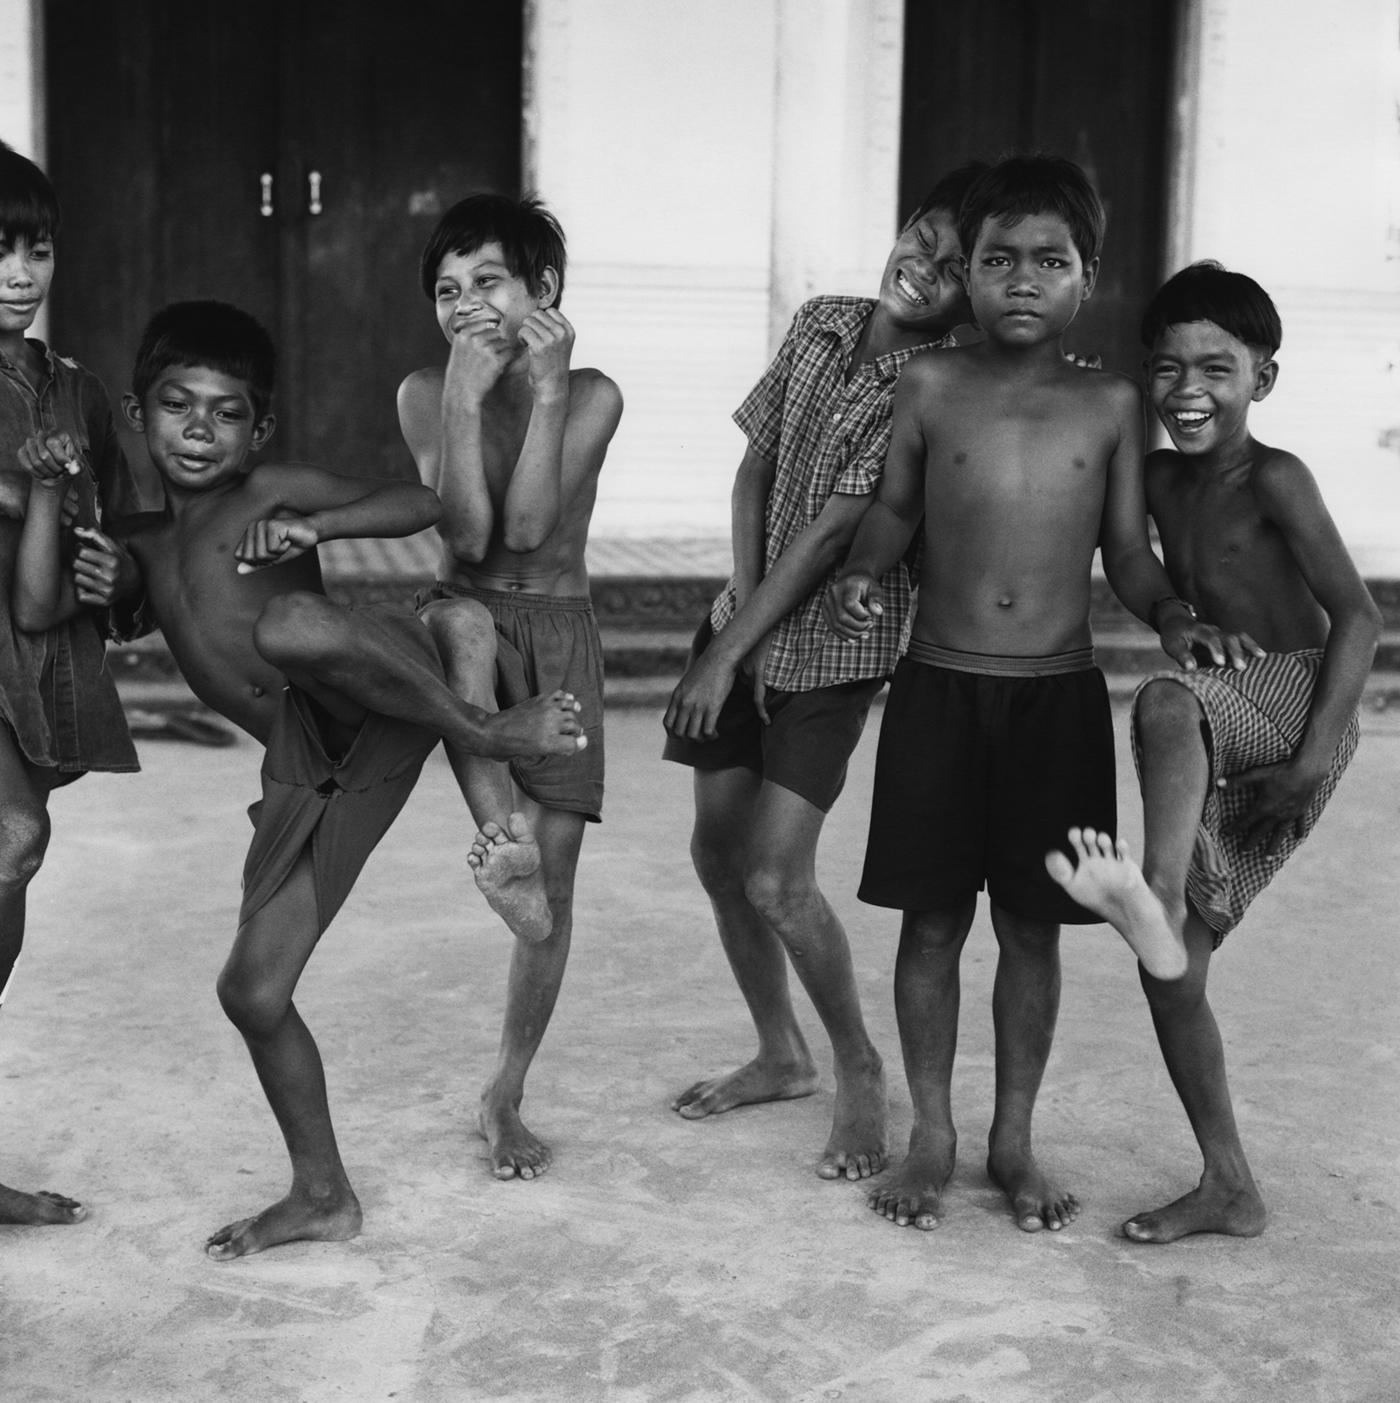 Justin Creedy Smith Black and White Photograph - Cambodia Smiles - Limited Edition - Oversize print